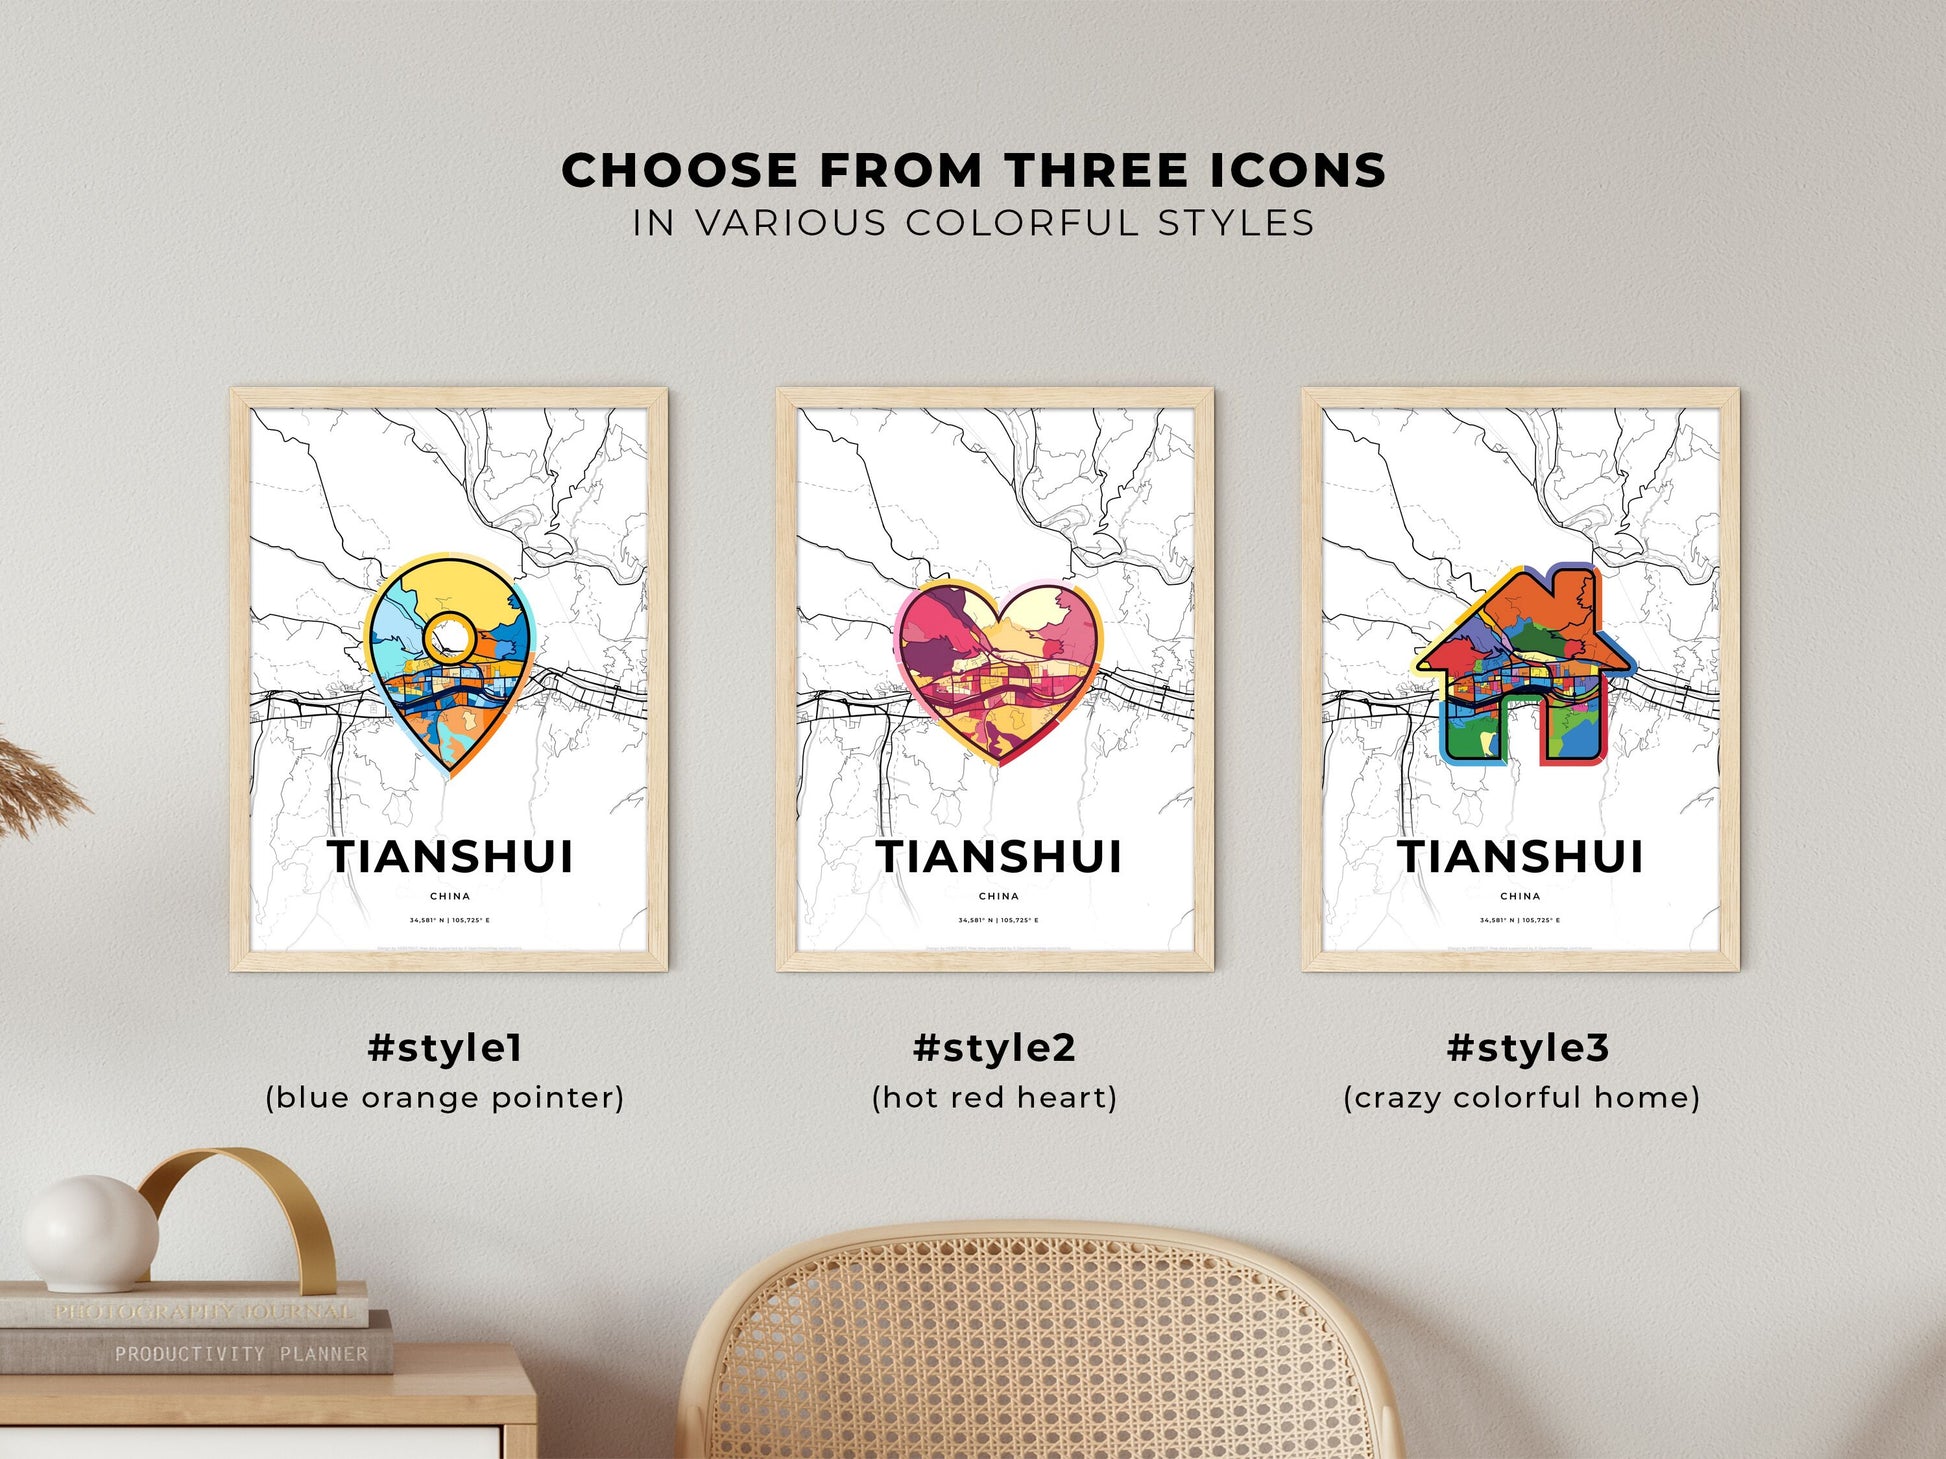 TIANSHUI CHINA minimal art map with a colorful icon.